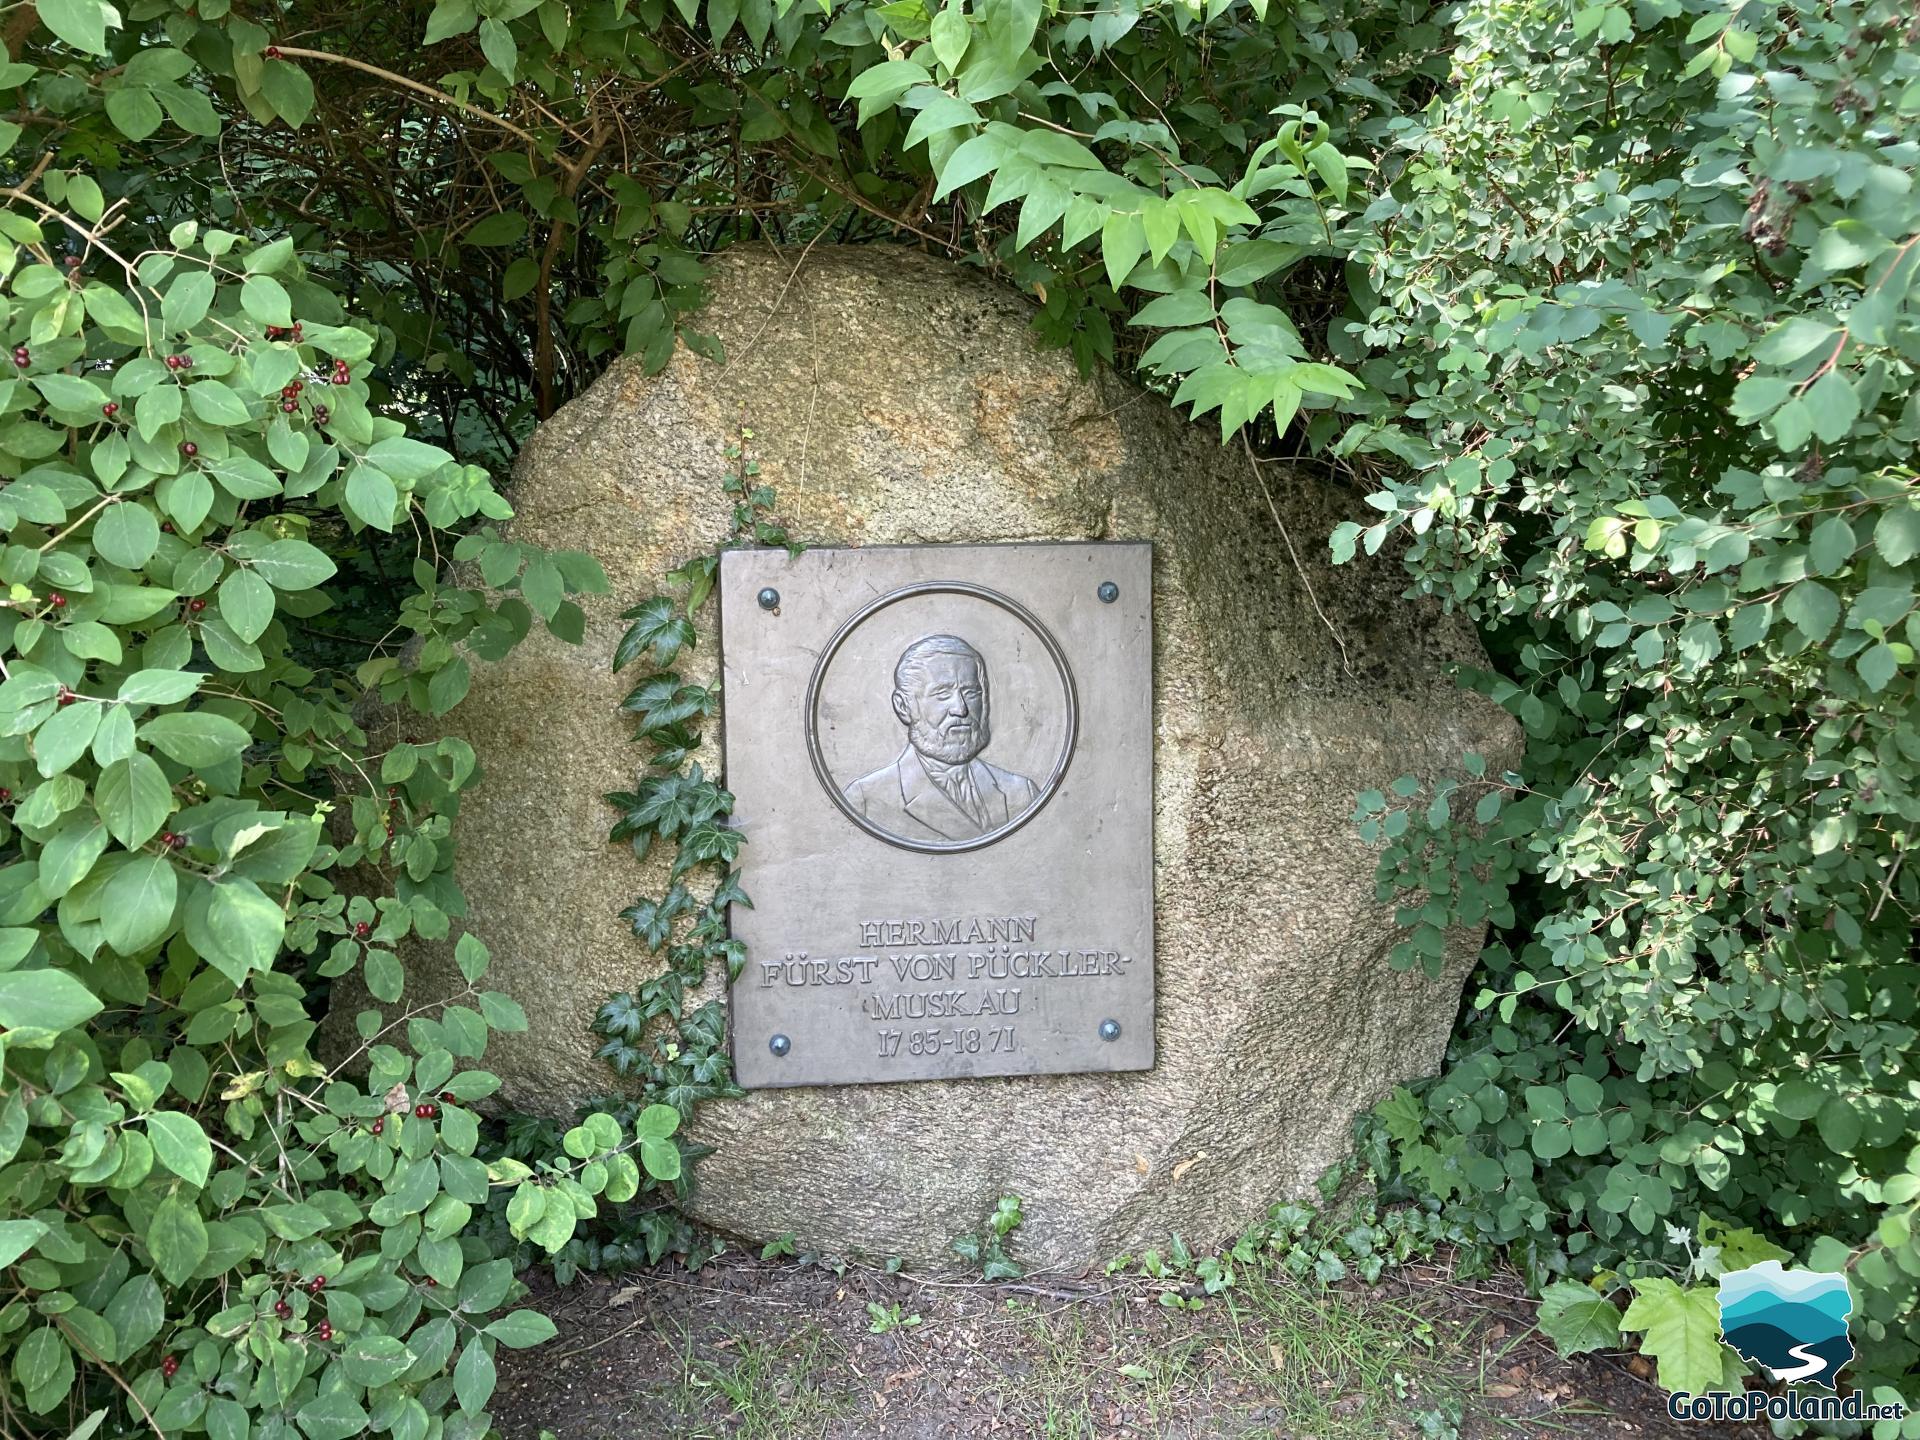 on the stone, there is a plaque with the name of the founder of the park